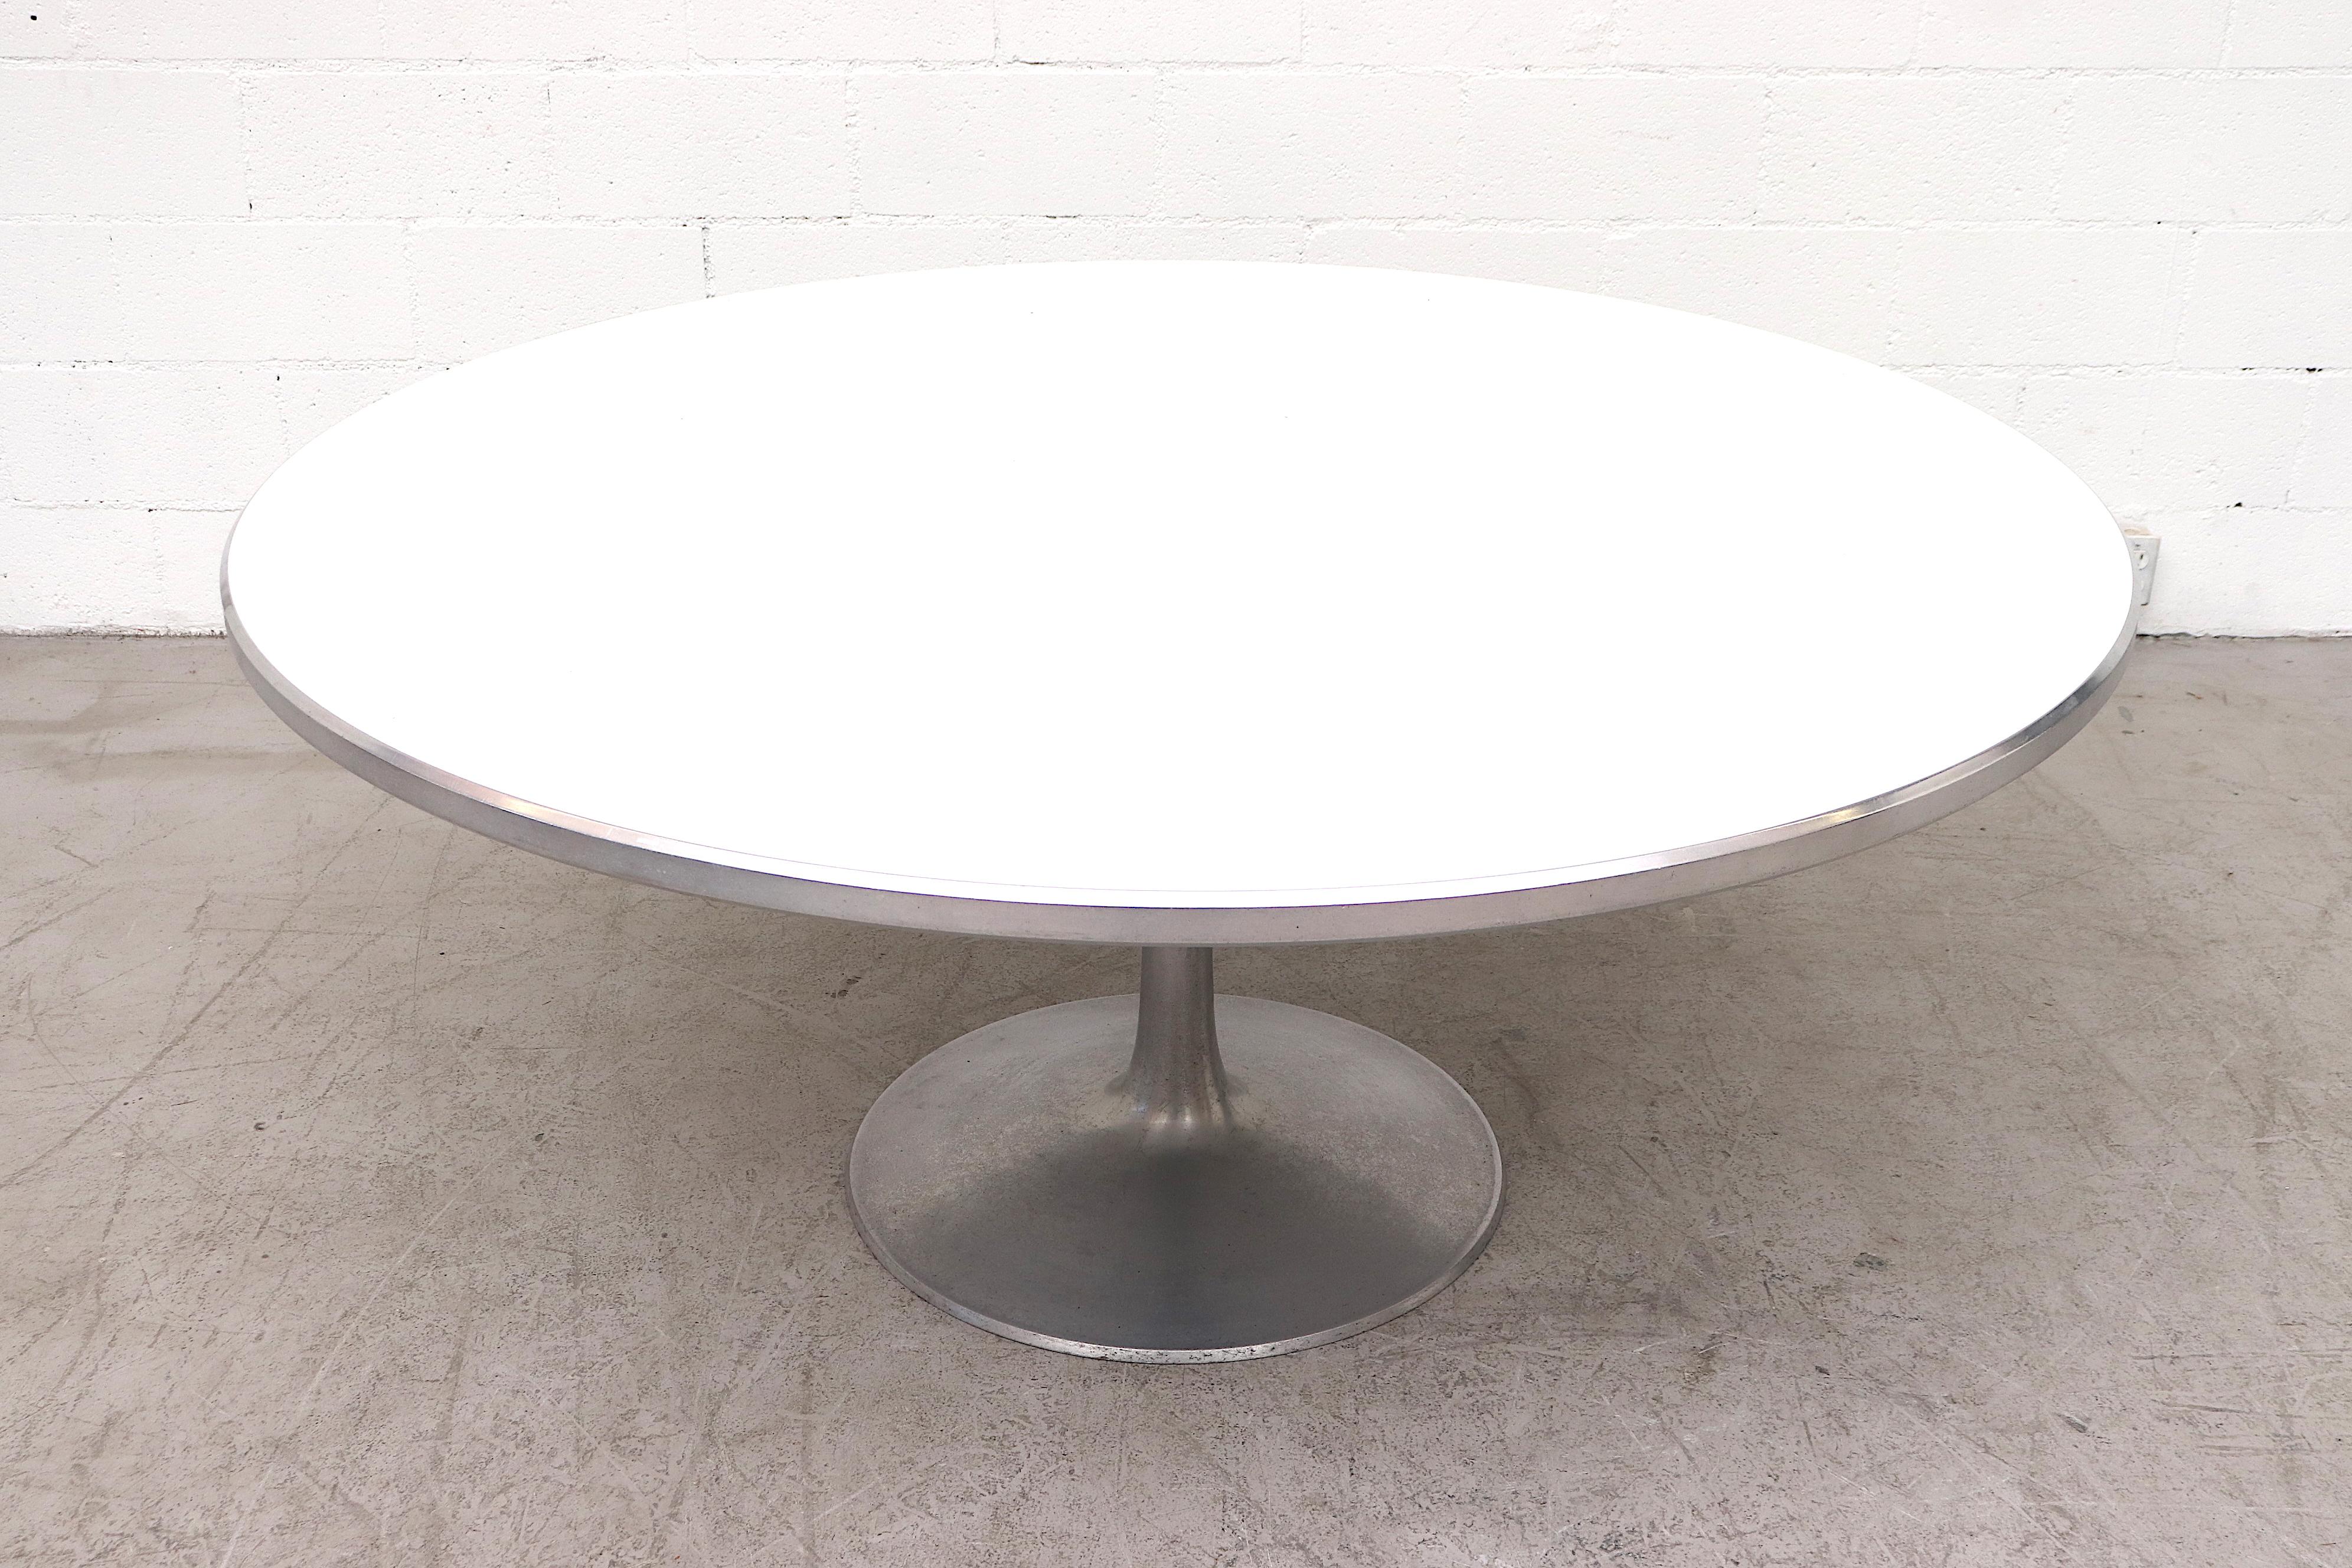 Extra large Poul Cadovius round dining table with aluminum base and edge and white Formica top. In original condition with visible wear to frame and surface. Another smaller Cadovius dining table (LU922418398202) also available and listed separately.